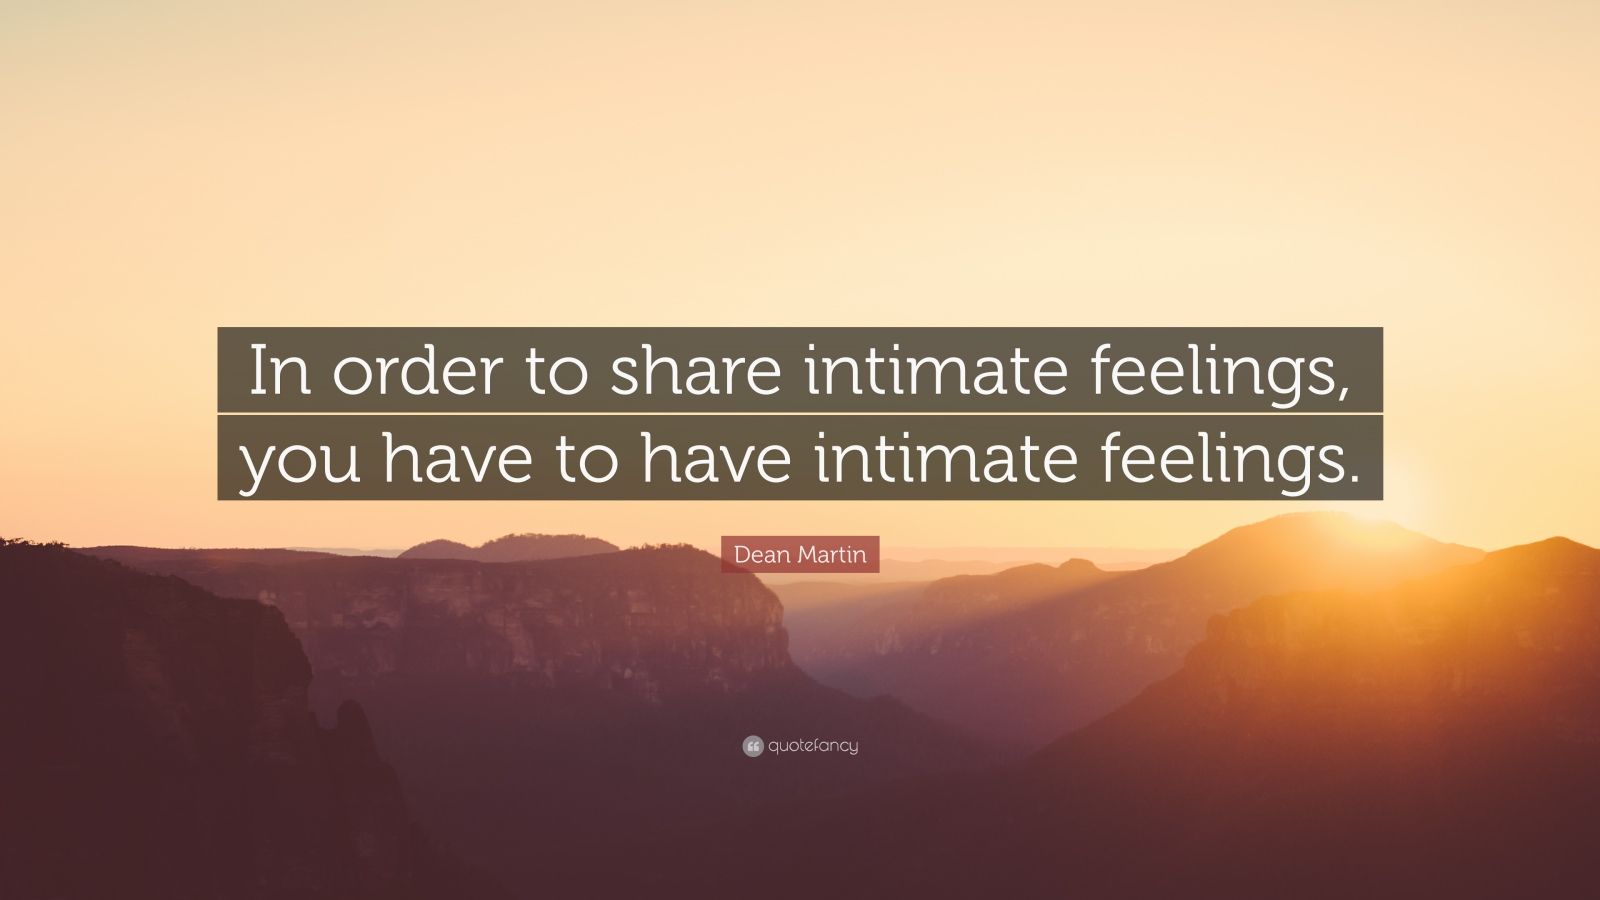 Dean Martin Quote: “In order to share intimate feelings, you have to have intimate feelings.”